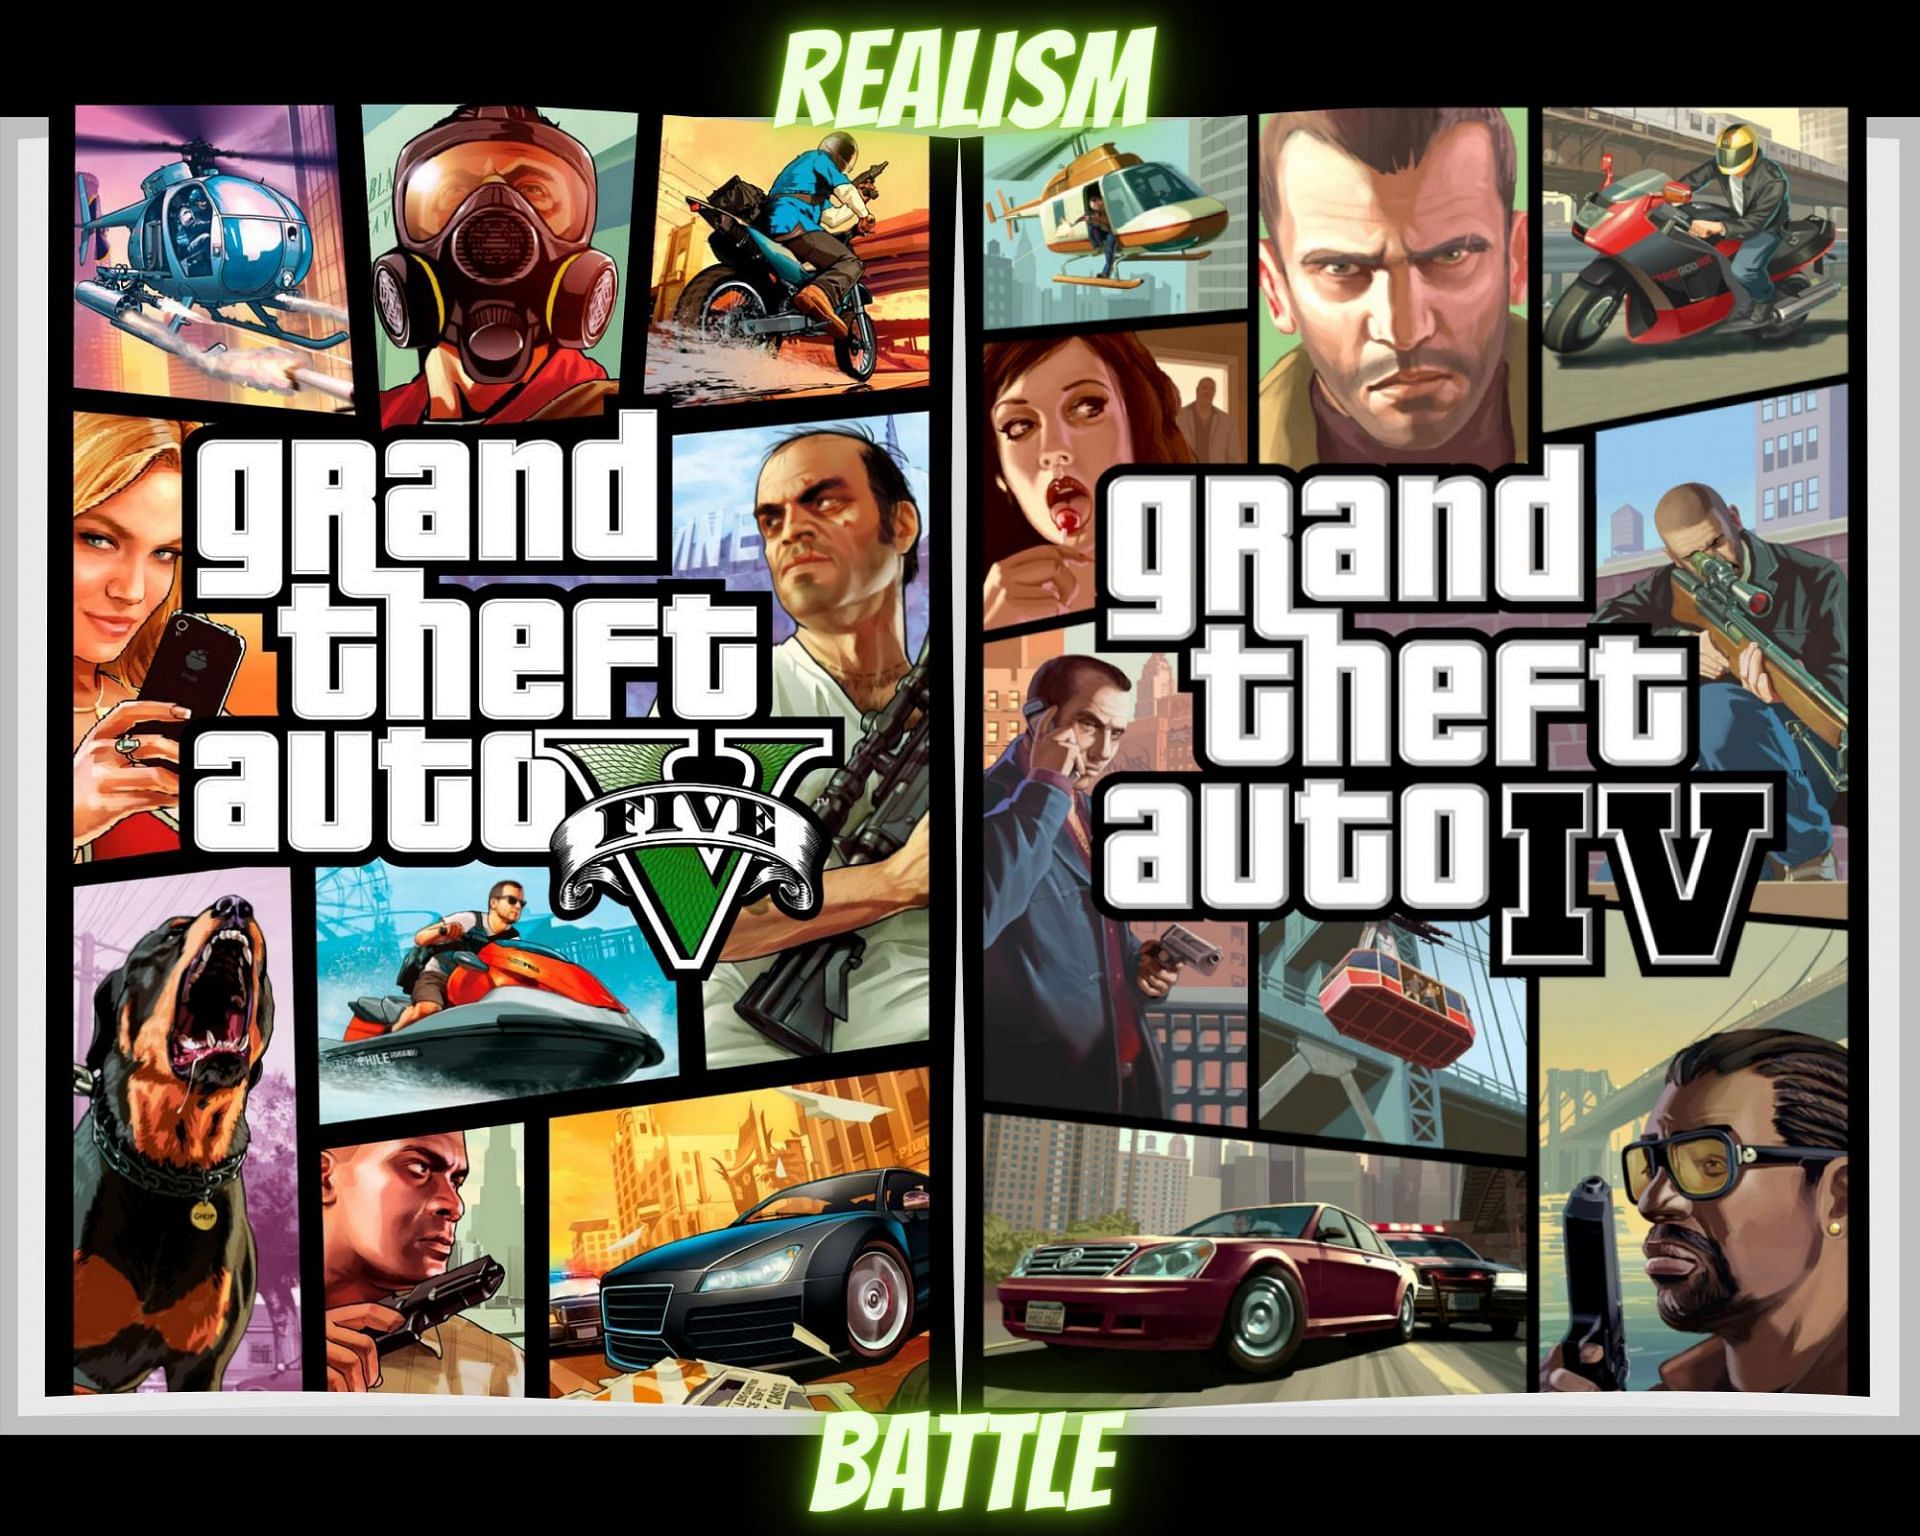 game is more realistic according to GTA 4 or 5?